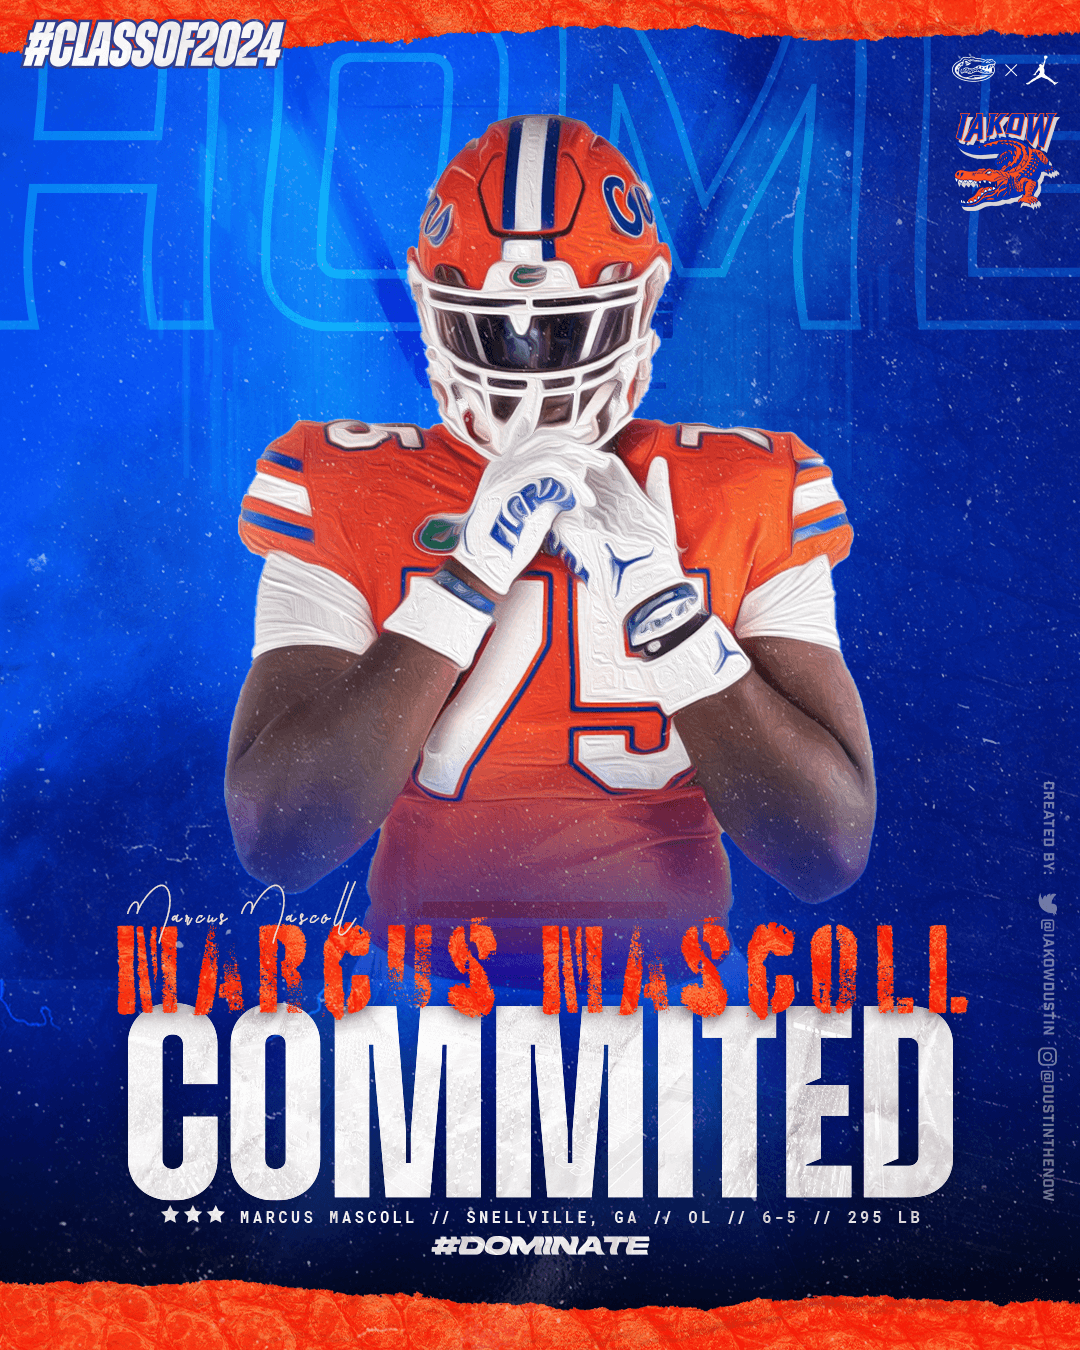 Marcus Mascoll Commits to Florida